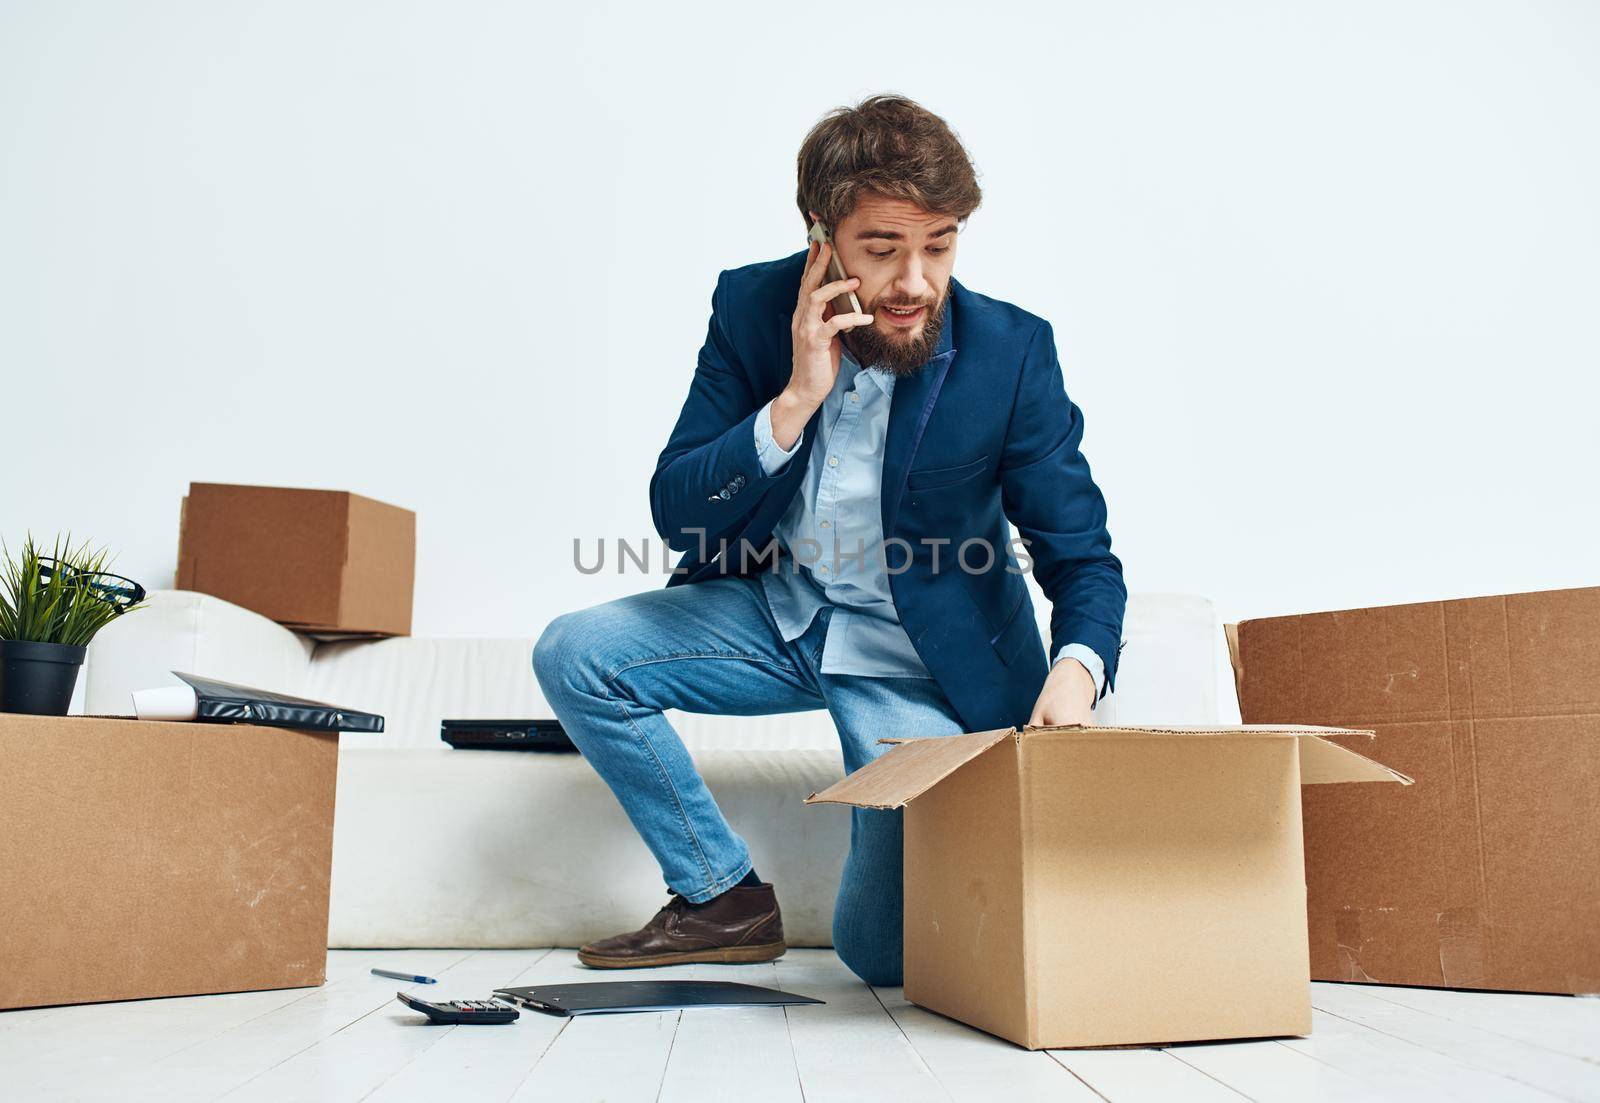 Manager talking on the phone office boxes unpacking emotions of an official. High quality photo